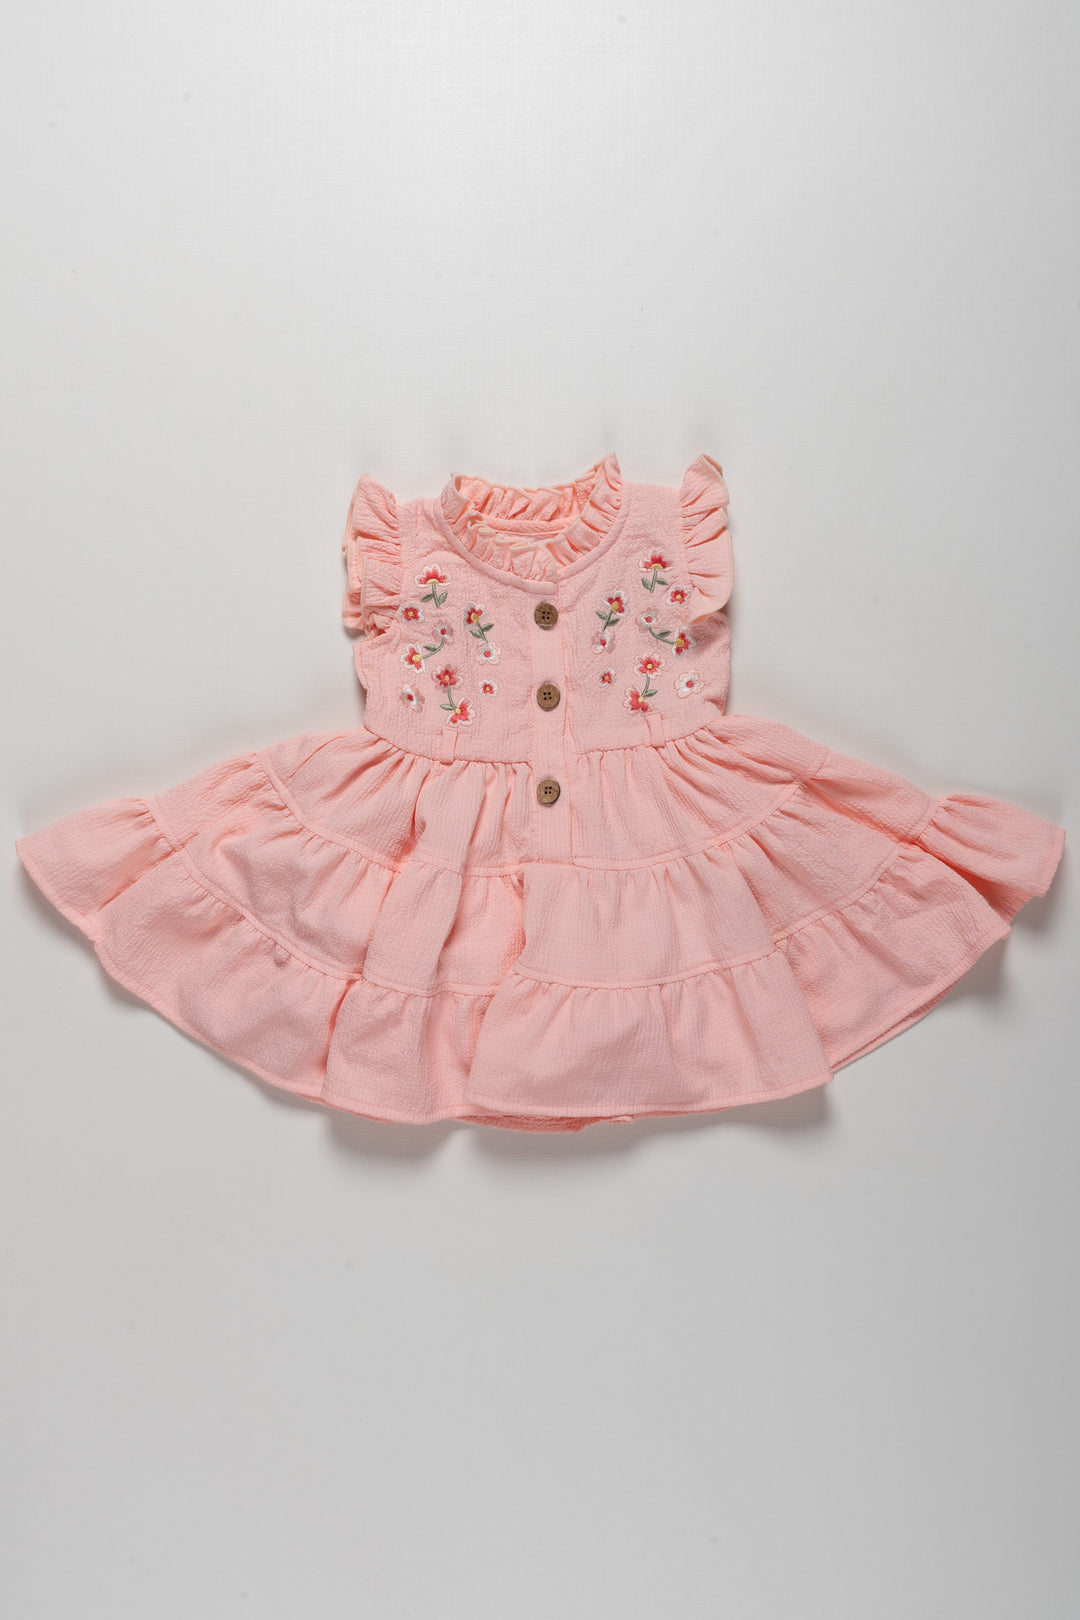 The Nesavu Girls Cotton Frock Adorable Girls Pink Cotton Ruffle Frock with Floral Embroidery Nesavu 16 (1Y) / Pink / Cotton GFC1328B-16 Adorable Girls Pink Cotton Ruffle Frock with Floral Embroidery | The Nesavu